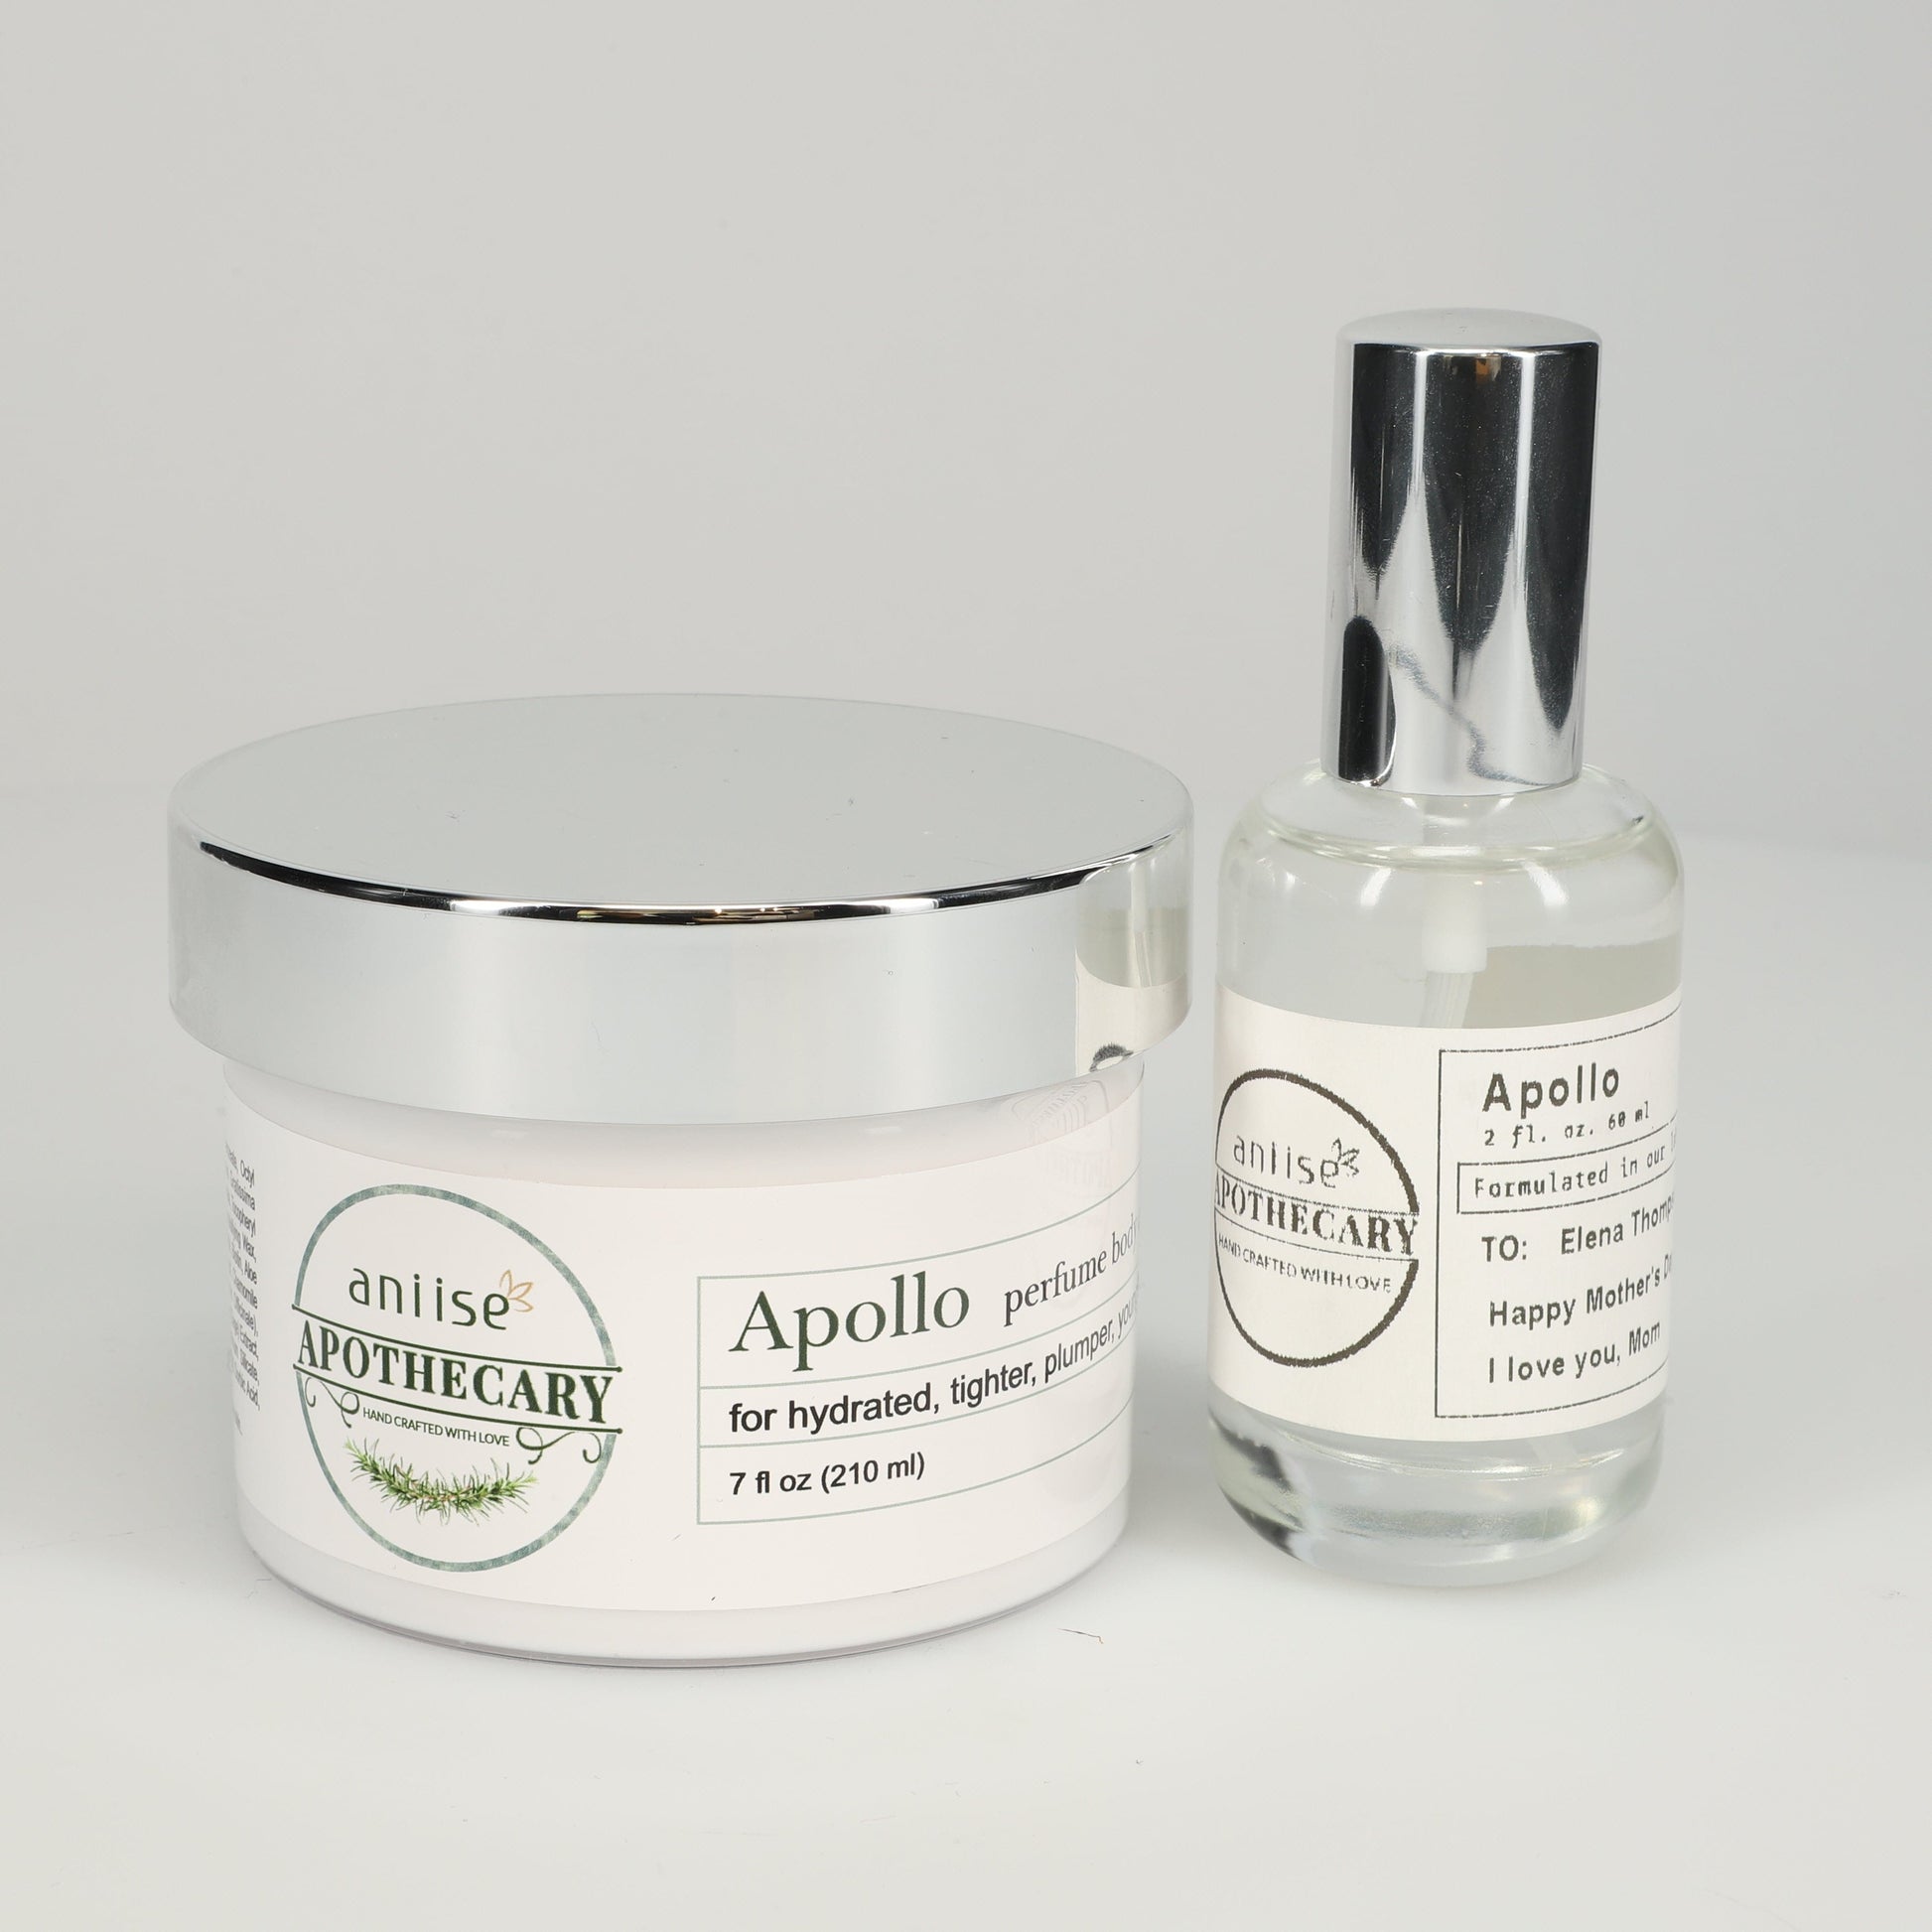 Indulge in luxury with our Apothecary Fragrance Oil/Perfume Body Cream Set. Each scent is inspired by a high-end fragrance, such as our Apollo scent, which captures the essence of BACCARAT ROUGE 540 with woody cedar notes and hints of jasmine and saffron. Neptune - Inspired by OUD & BERGAMOT / Rich earthy scent with a hint of citrus. Juno - Inspired by DUB